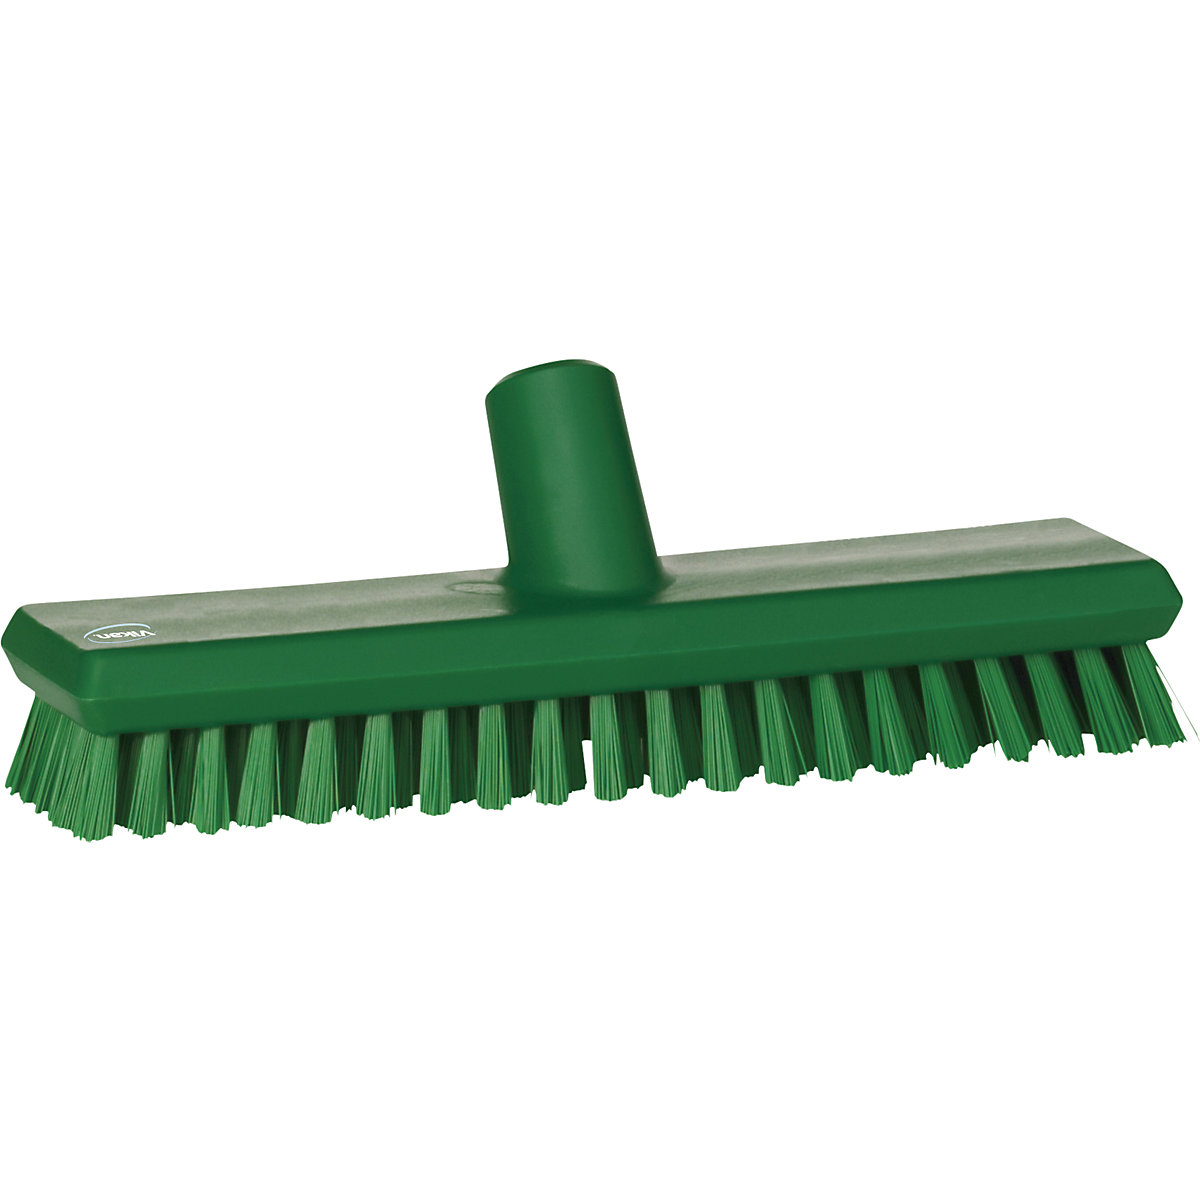 Vikan – Scrubber with water channel, extra hard, pack of 10, green